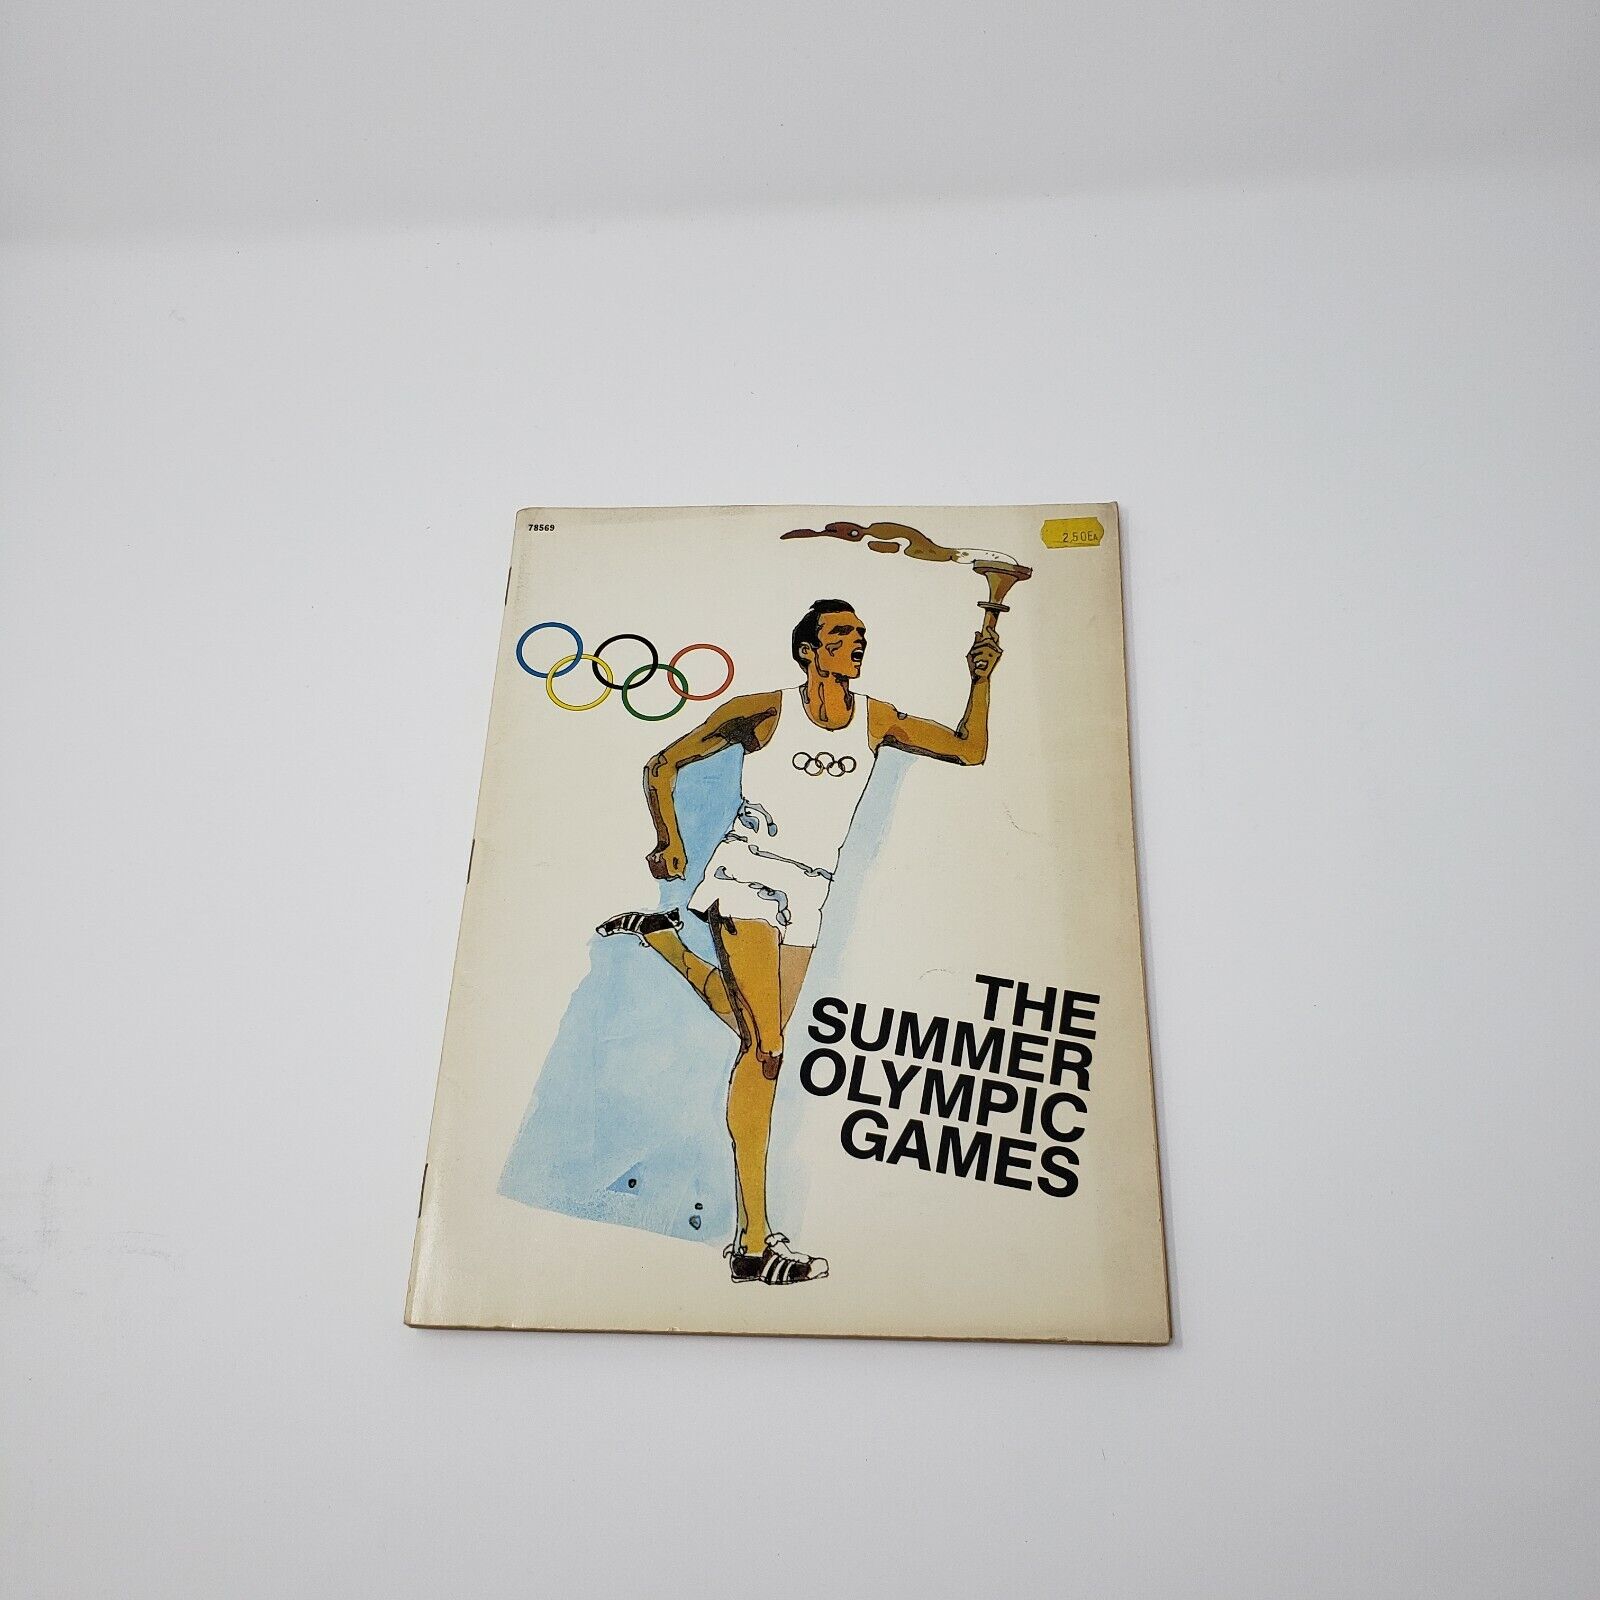 RARE Vintage 1972 The Summer Olympic Games by Jock Carroll A Complete Guide